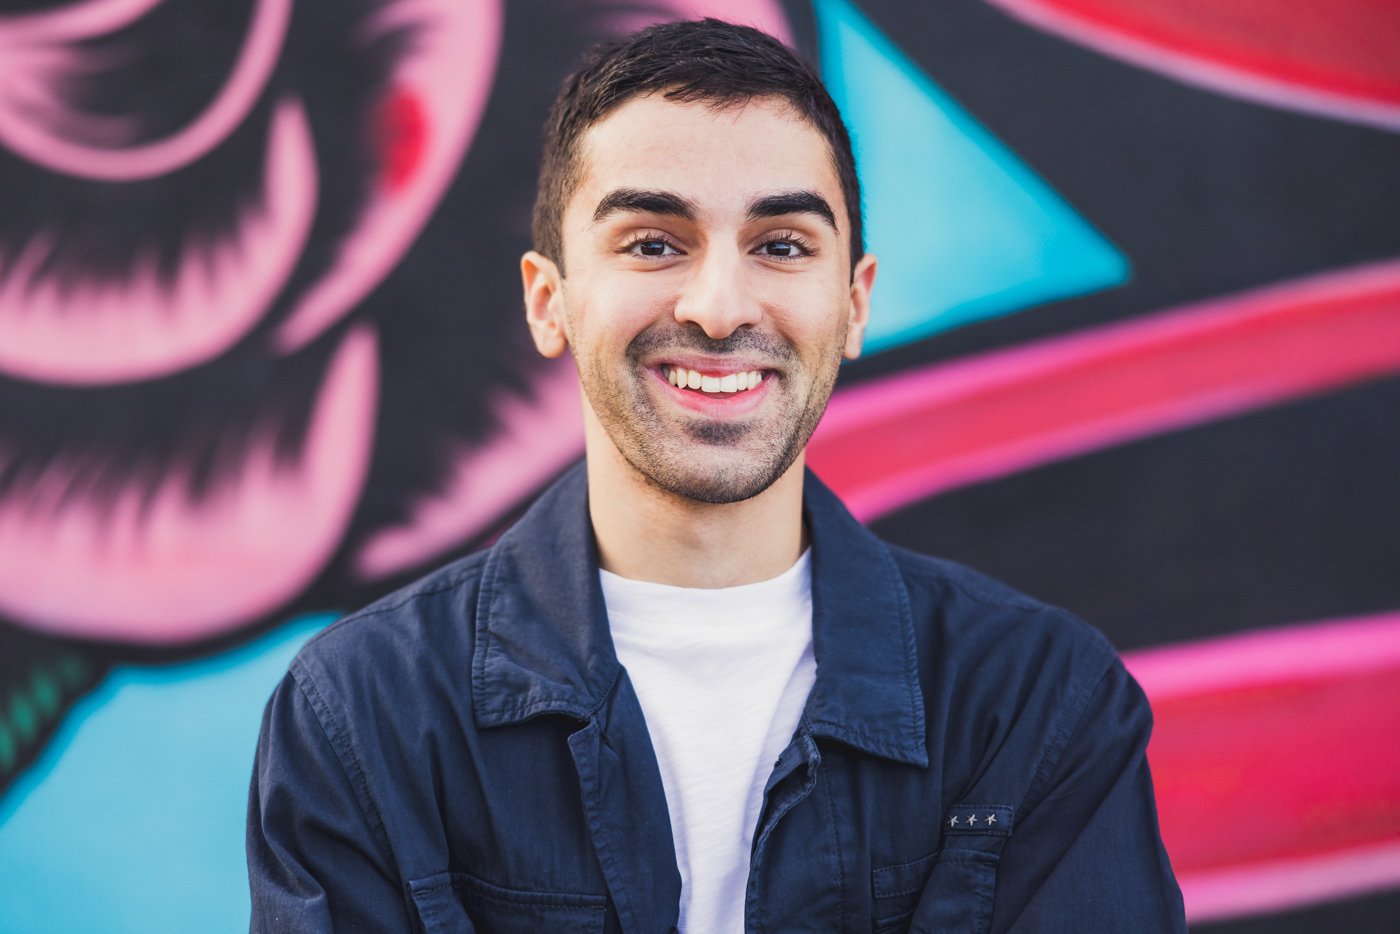 man smiling in front of colorful mural for headshot